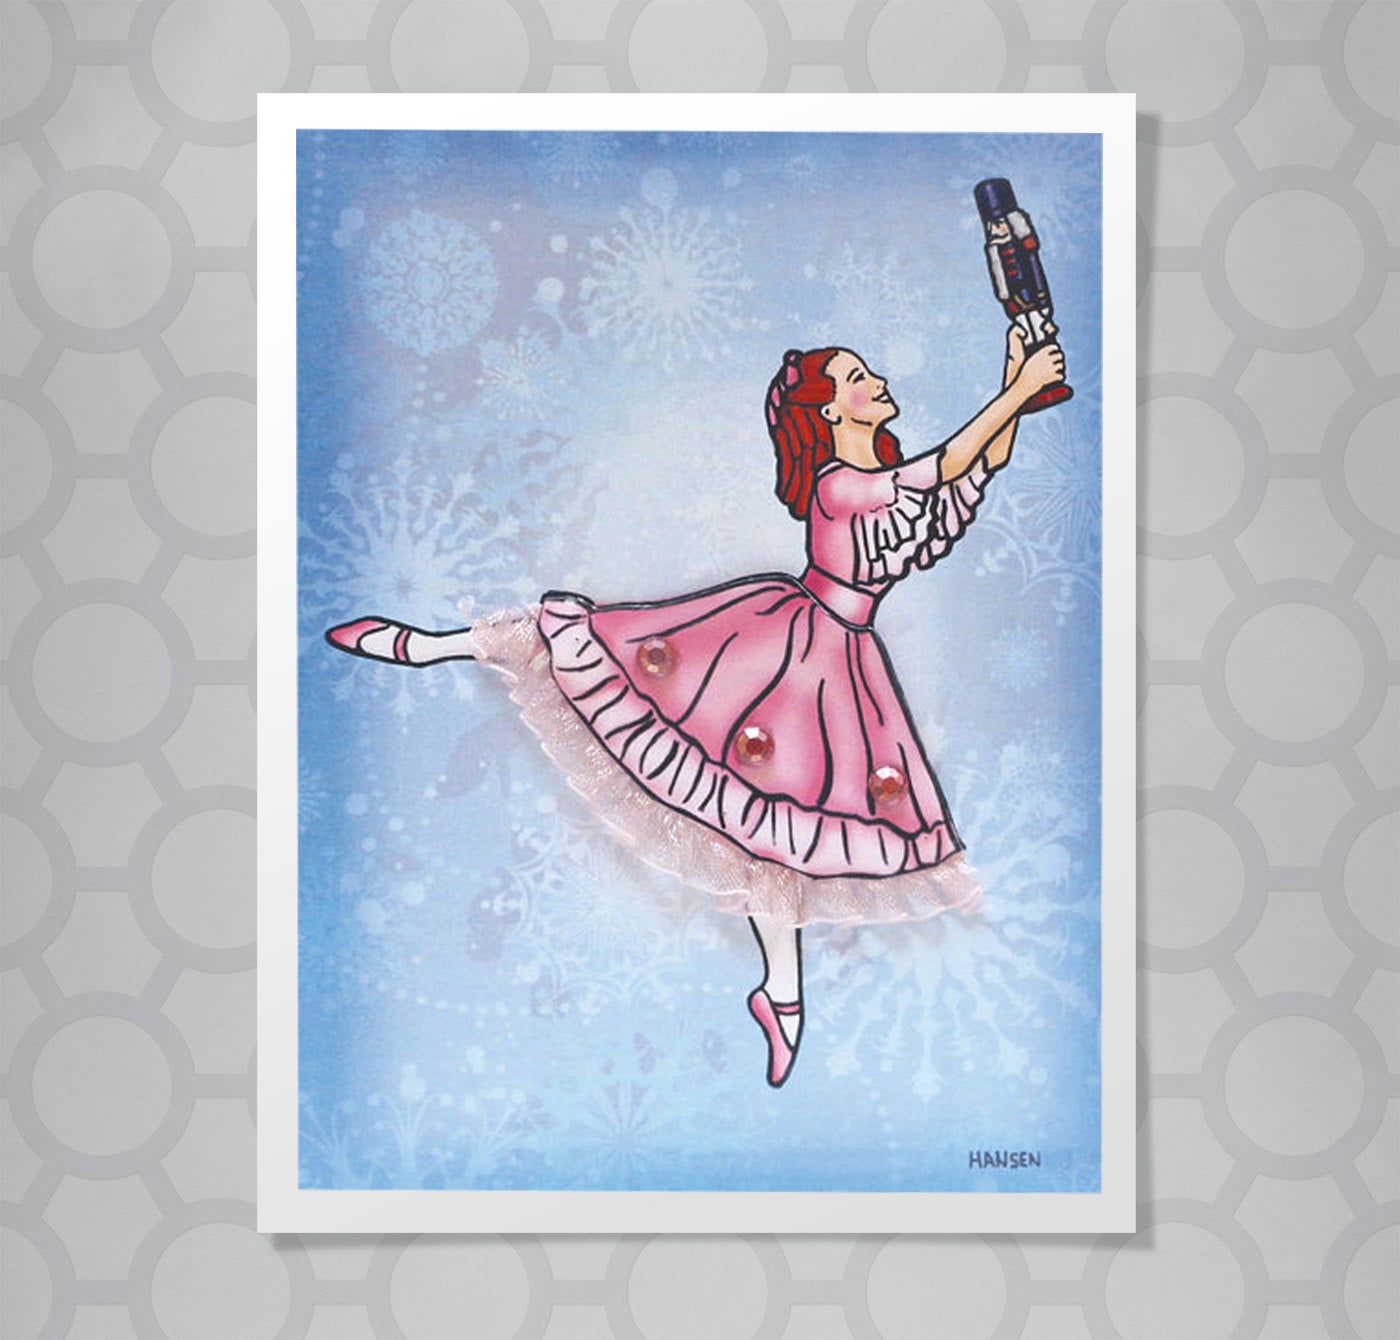 Illustration of the nutcracker ballerina Claire on point with a dimensional skirt.